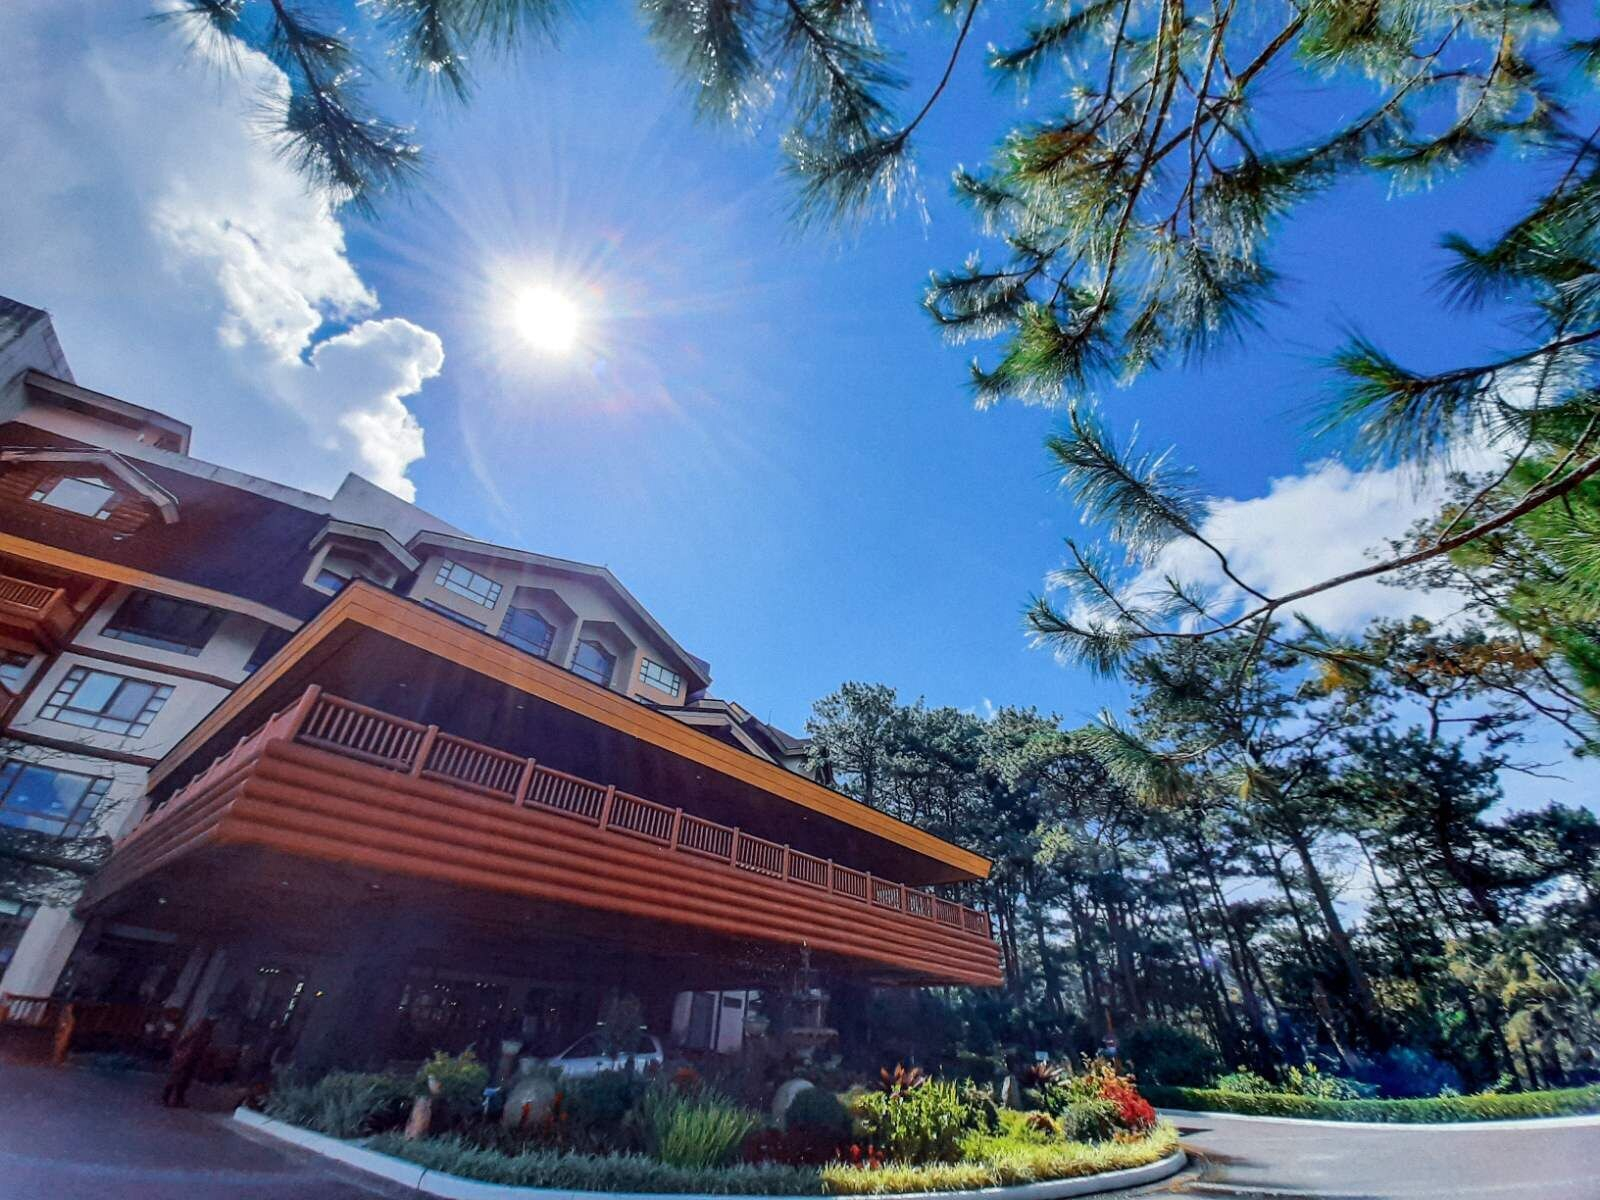 Exterior & Views, The Forest Lodge at Camp John Hay, Baguio City